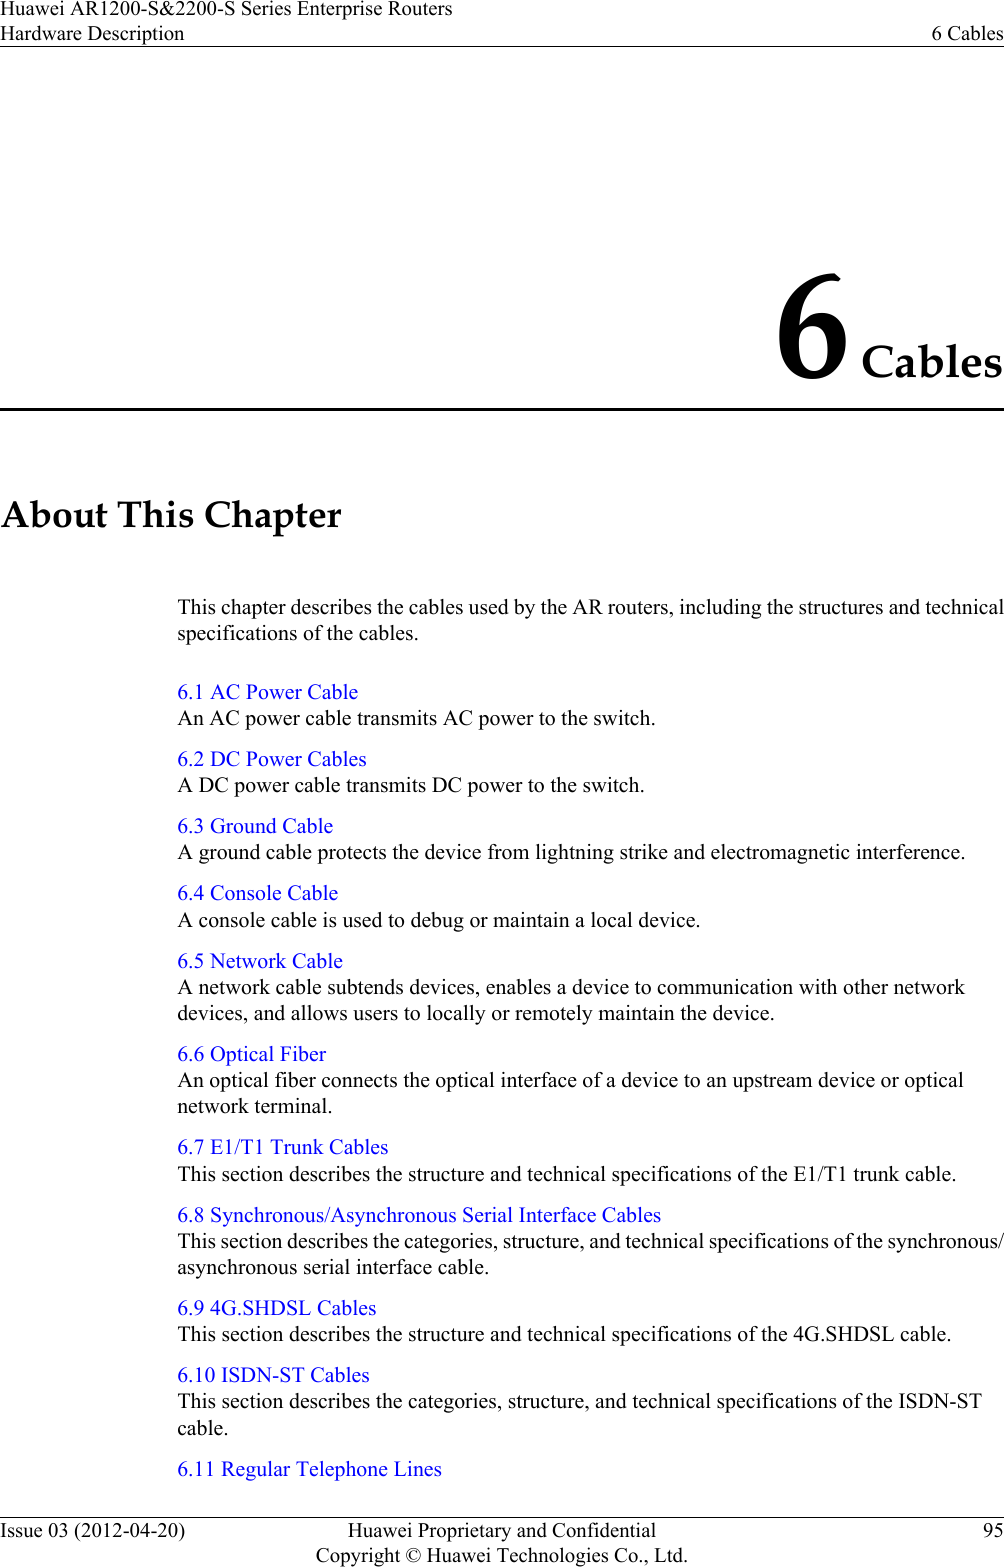 6 CablesAbout This ChapterThis chapter describes the cables used by the AR routers, including the structures and technicalspecifications of the cables.6.1 AC Power CableAn AC power cable transmits AC power to the switch.6.2 DC Power CablesA DC power cable transmits DC power to the switch.6.3 Ground CableA ground cable protects the device from lightning strike and electromagnetic interference.6.4 Console CableA console cable is used to debug or maintain a local device.6.5 Network CableA network cable subtends devices, enables a device to communication with other networkdevices, and allows users to locally or remotely maintain the device.6.6 Optical FiberAn optical fiber connects the optical interface of a device to an upstream device or opticalnetwork terminal.6.7 E1/T1 Trunk CablesThis section describes the structure and technical specifications of the E1/T1 trunk cable.6.8 Synchronous/Asynchronous Serial Interface CablesThis section describes the categories, structure, and technical specifications of the synchronous/asynchronous serial interface cable.6.9 4G.SHDSL CablesThis section describes the structure and technical specifications of the 4G.SHDSL cable.6.10 ISDN-ST CablesThis section describes the categories, structure, and technical specifications of the ISDN-STcable.6.11 Regular Telephone LinesHuawei AR1200-S&amp;2200-S Series Enterprise RoutersHardware Description 6 CablesIssue 03 (2012-04-20) Huawei Proprietary and ConfidentialCopyright © Huawei Technologies Co., Ltd.95